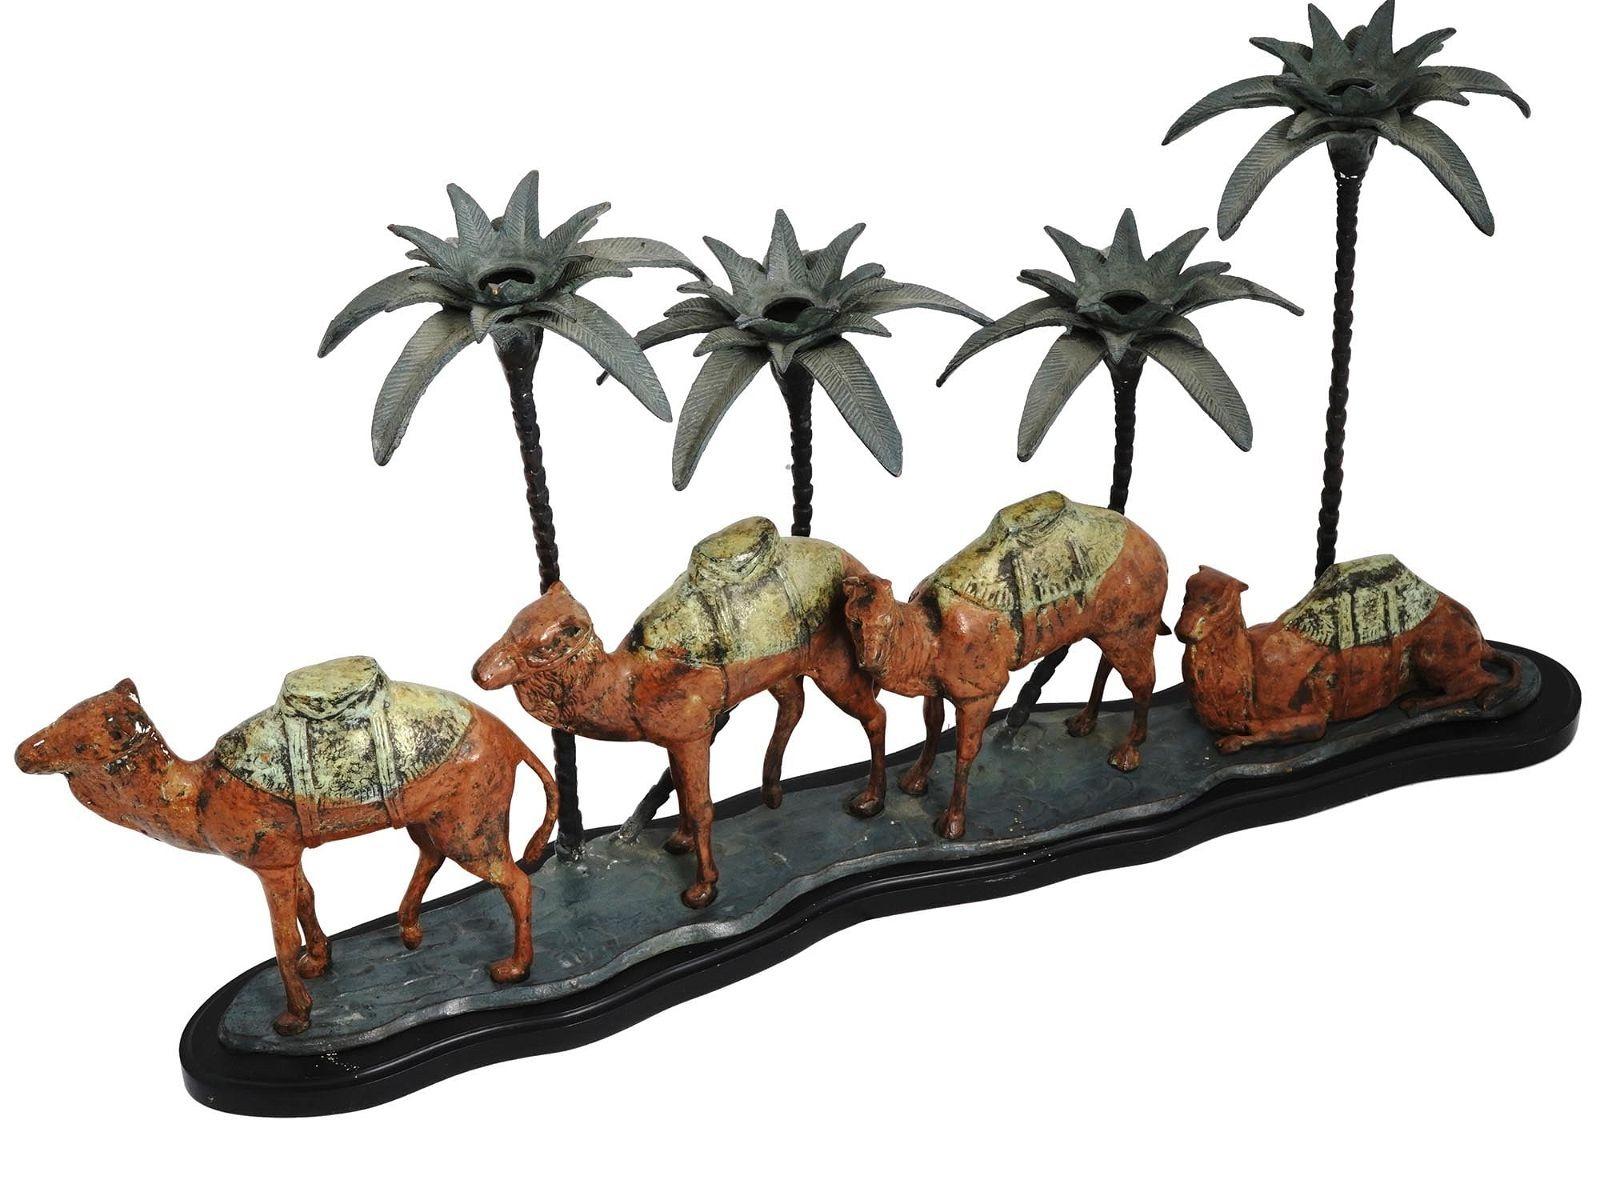 Vintage candle holder after the original Orientalist period Austrian original, depicting Middle Eastern camels with four palm tree candle holders.